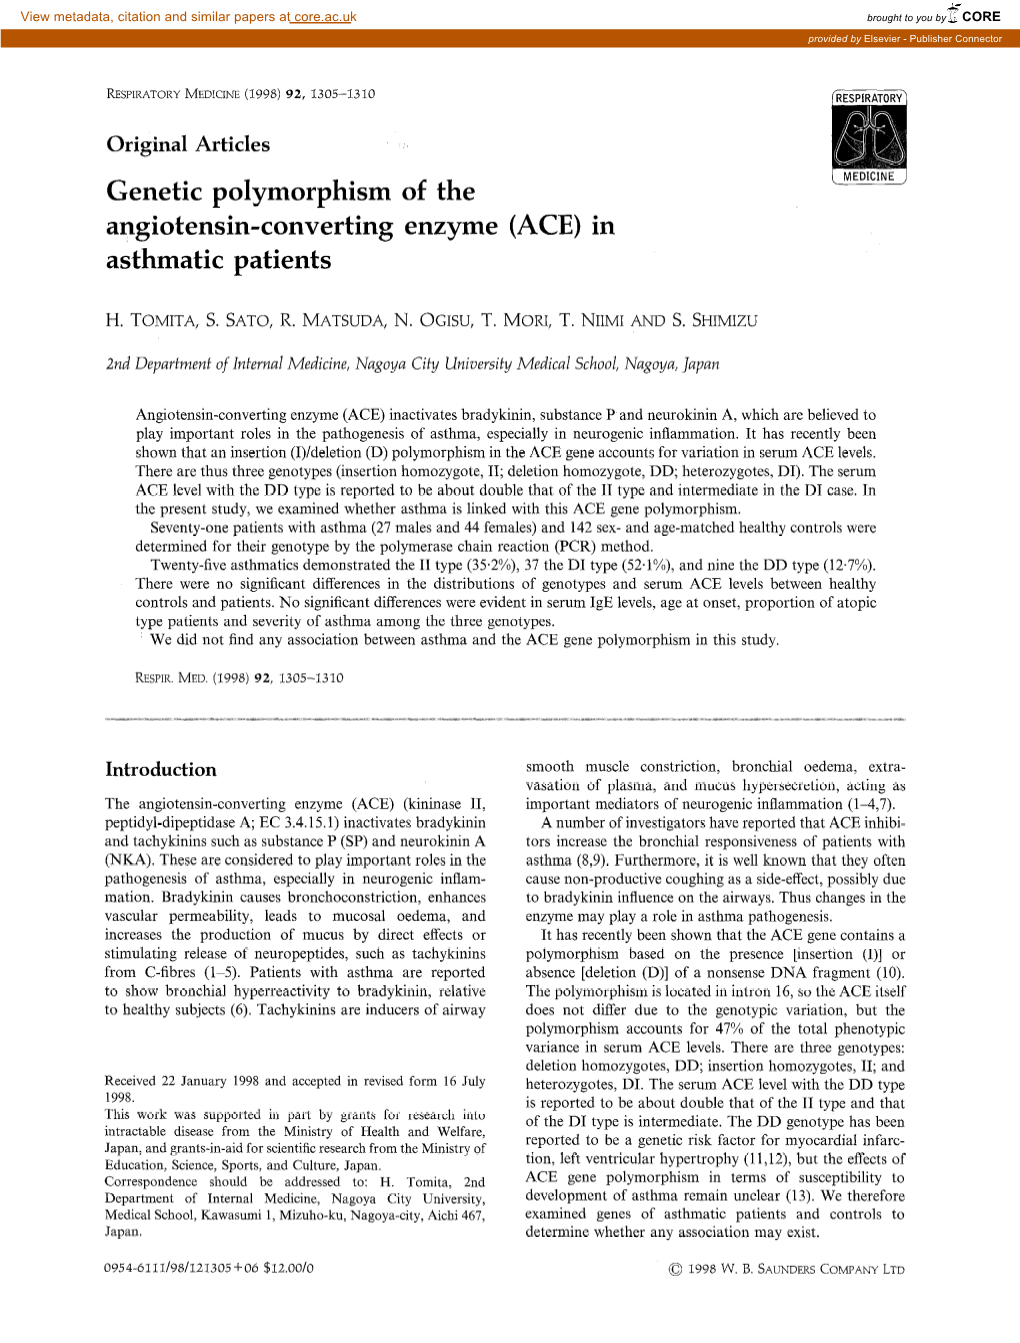 Genetic Polymorphism of the Angiotensin-Converting Enzyme (ACE) in Asthmatic Patients